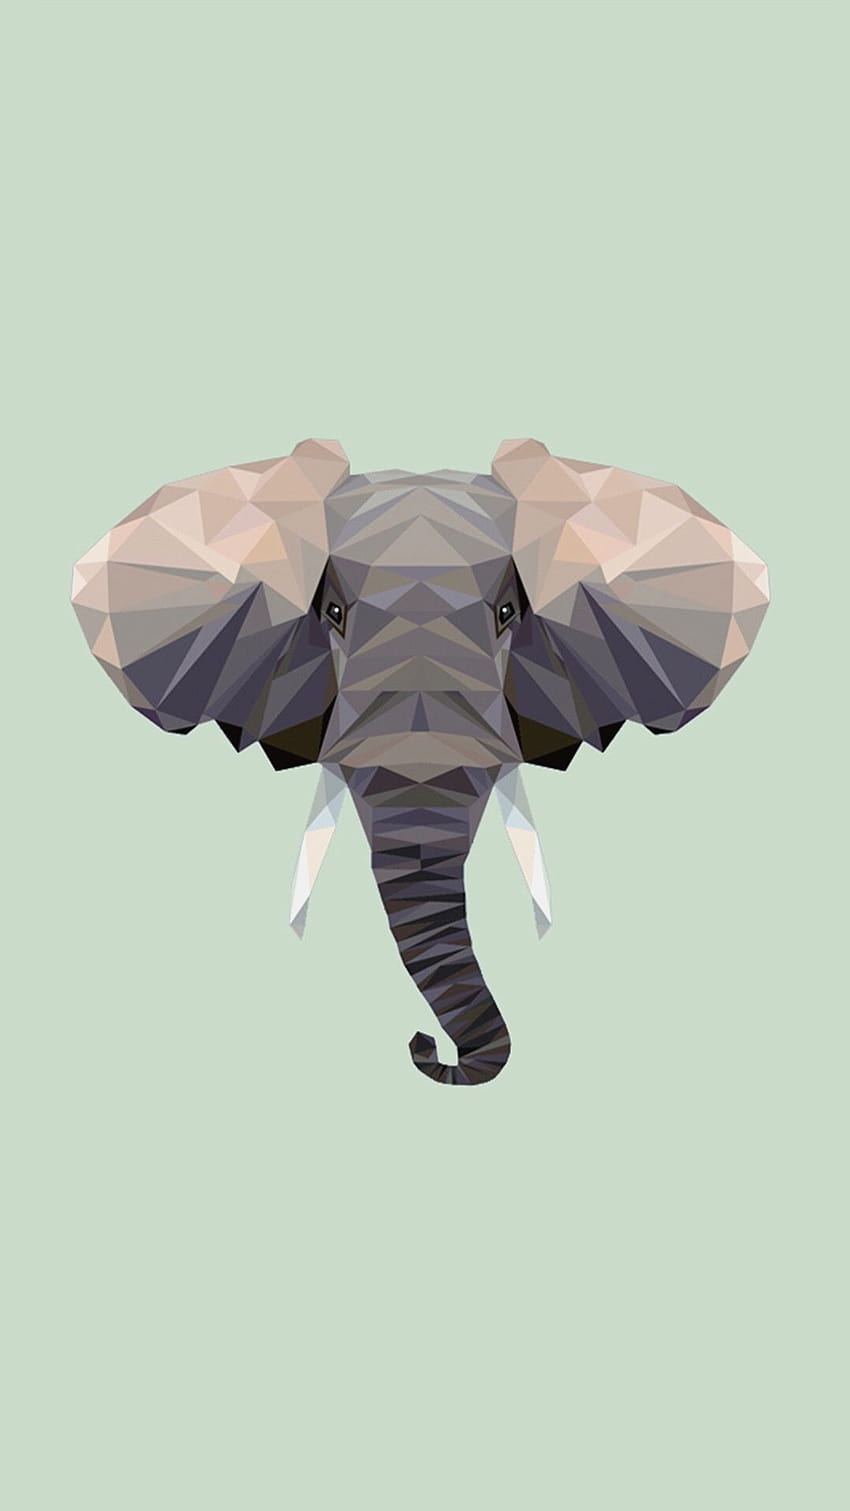 Elephant Iphone Backgrounds posted by Sarah Mercado, cute elephant aesthetic HD phone wallpaper